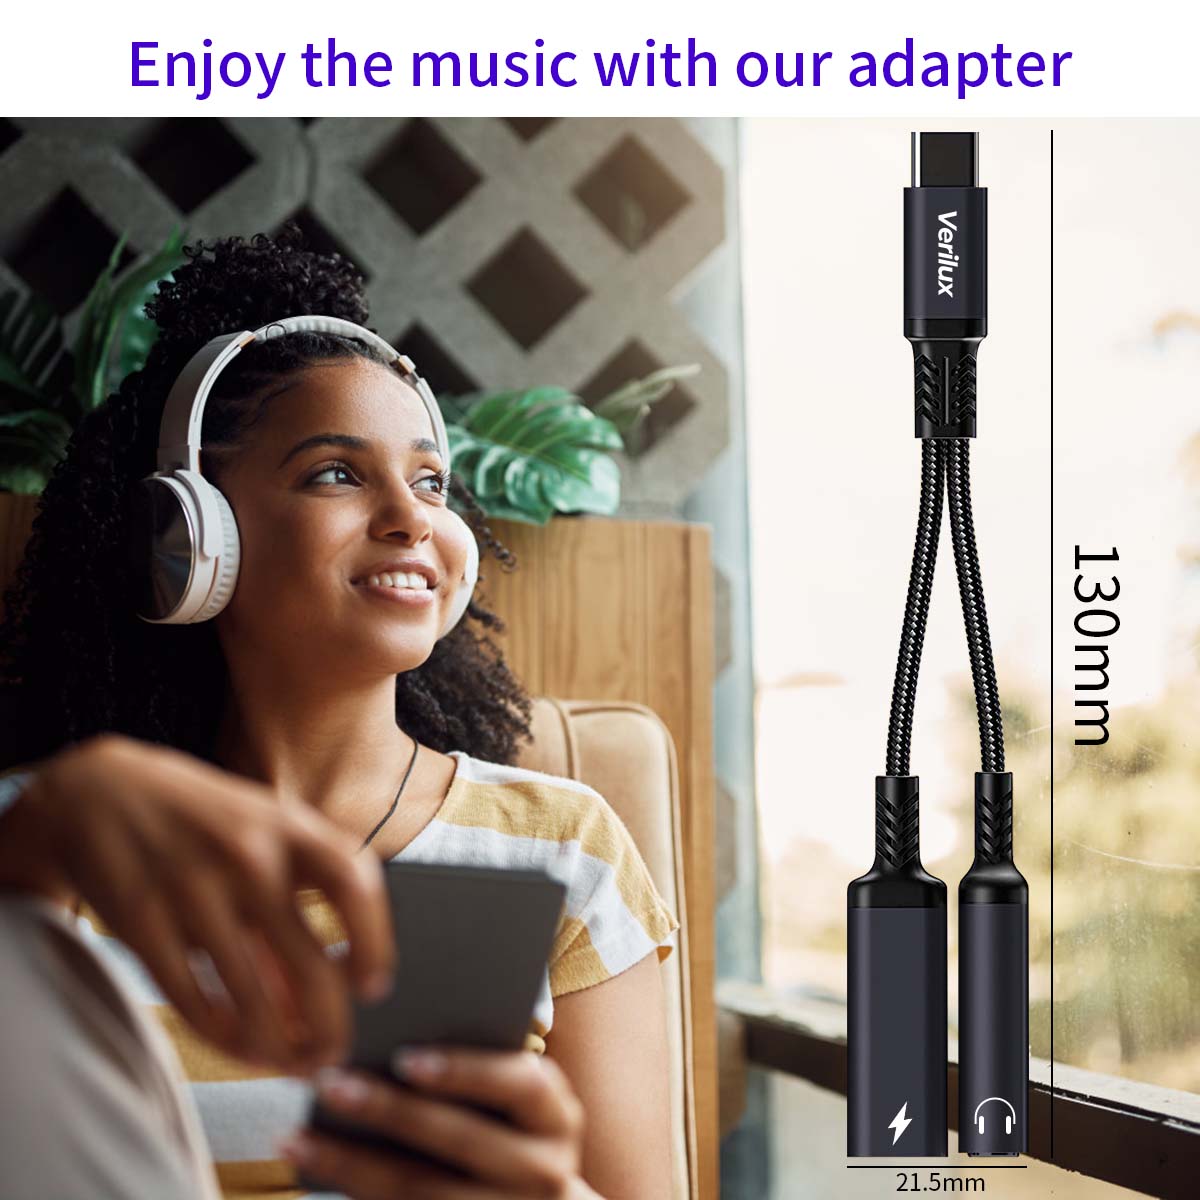 Verilux USB C to 3.5mm Jack Audio Adapter, 2 in 1 USB Type C to Aux Audio Jack with PD 60W Fast Charging Cable Cord Compatible with Galaxy S22 S21 Ultra 5G S20 S20+ Plus Note 20, More Type C Devices